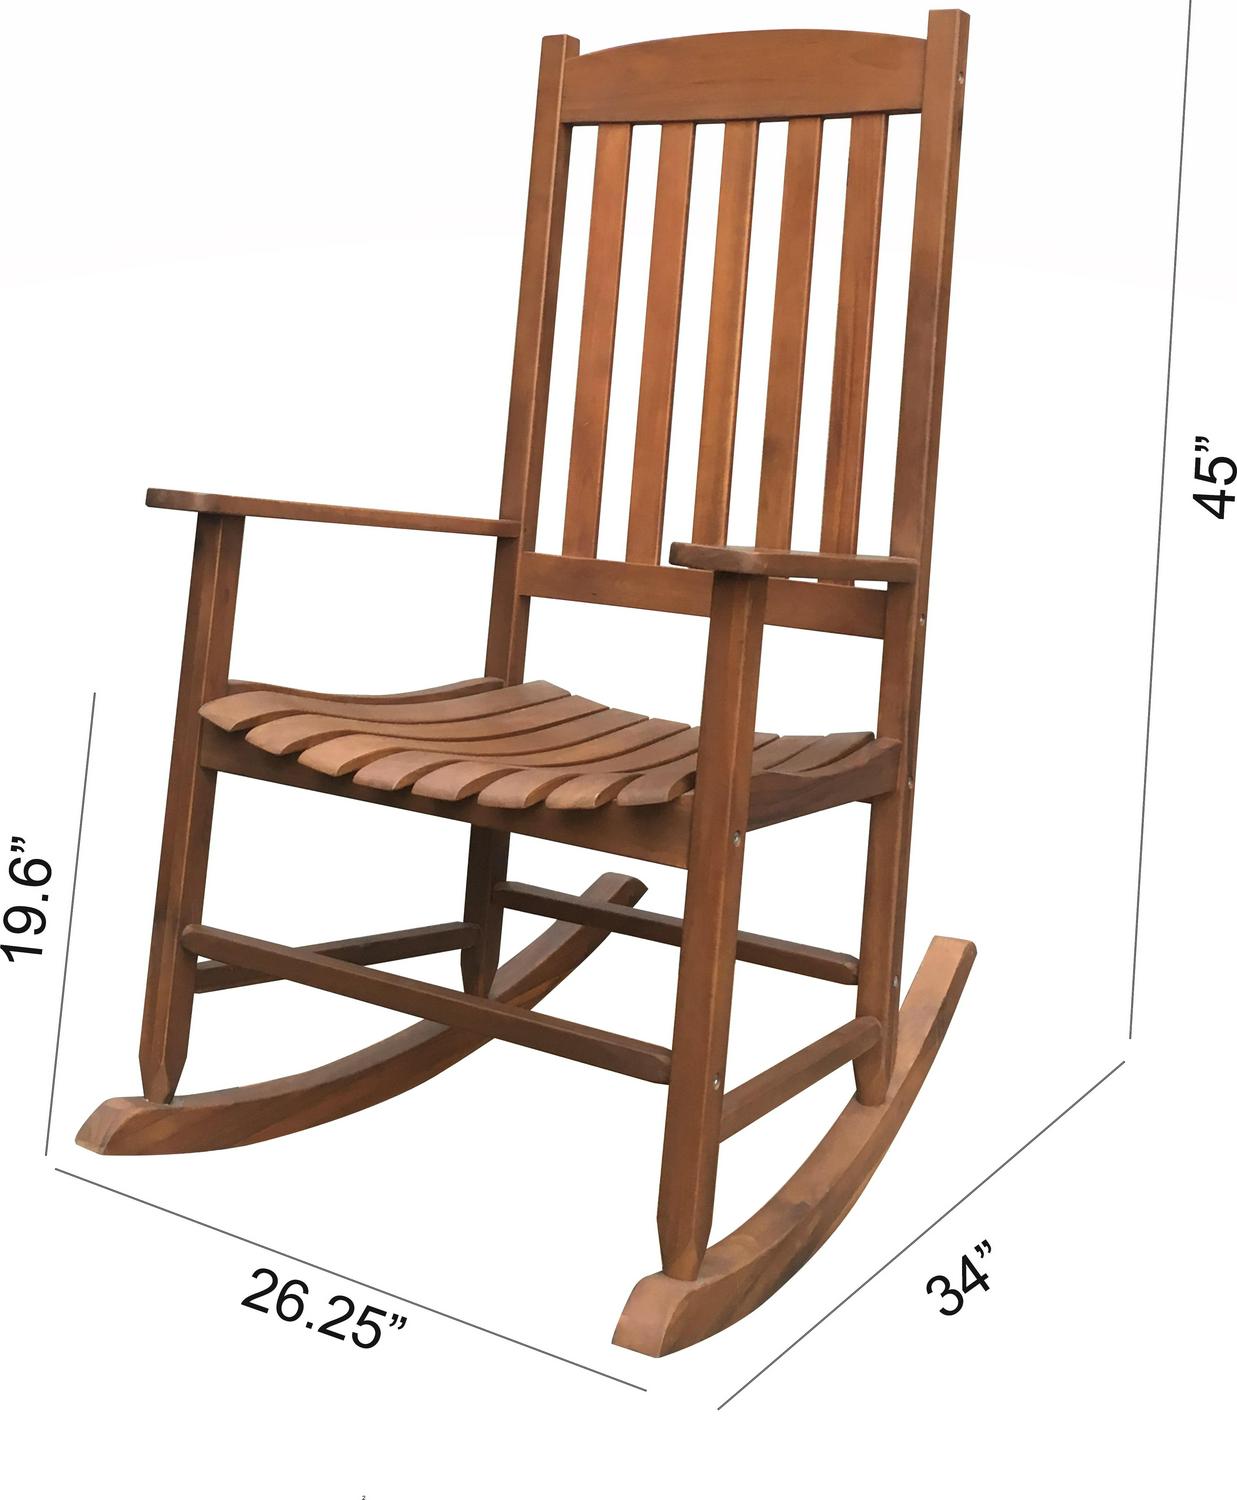 Outdoor Wood Porch Rocking Chair Weather Resistant Support Up To 250 lbs Populaire aanbiedingen